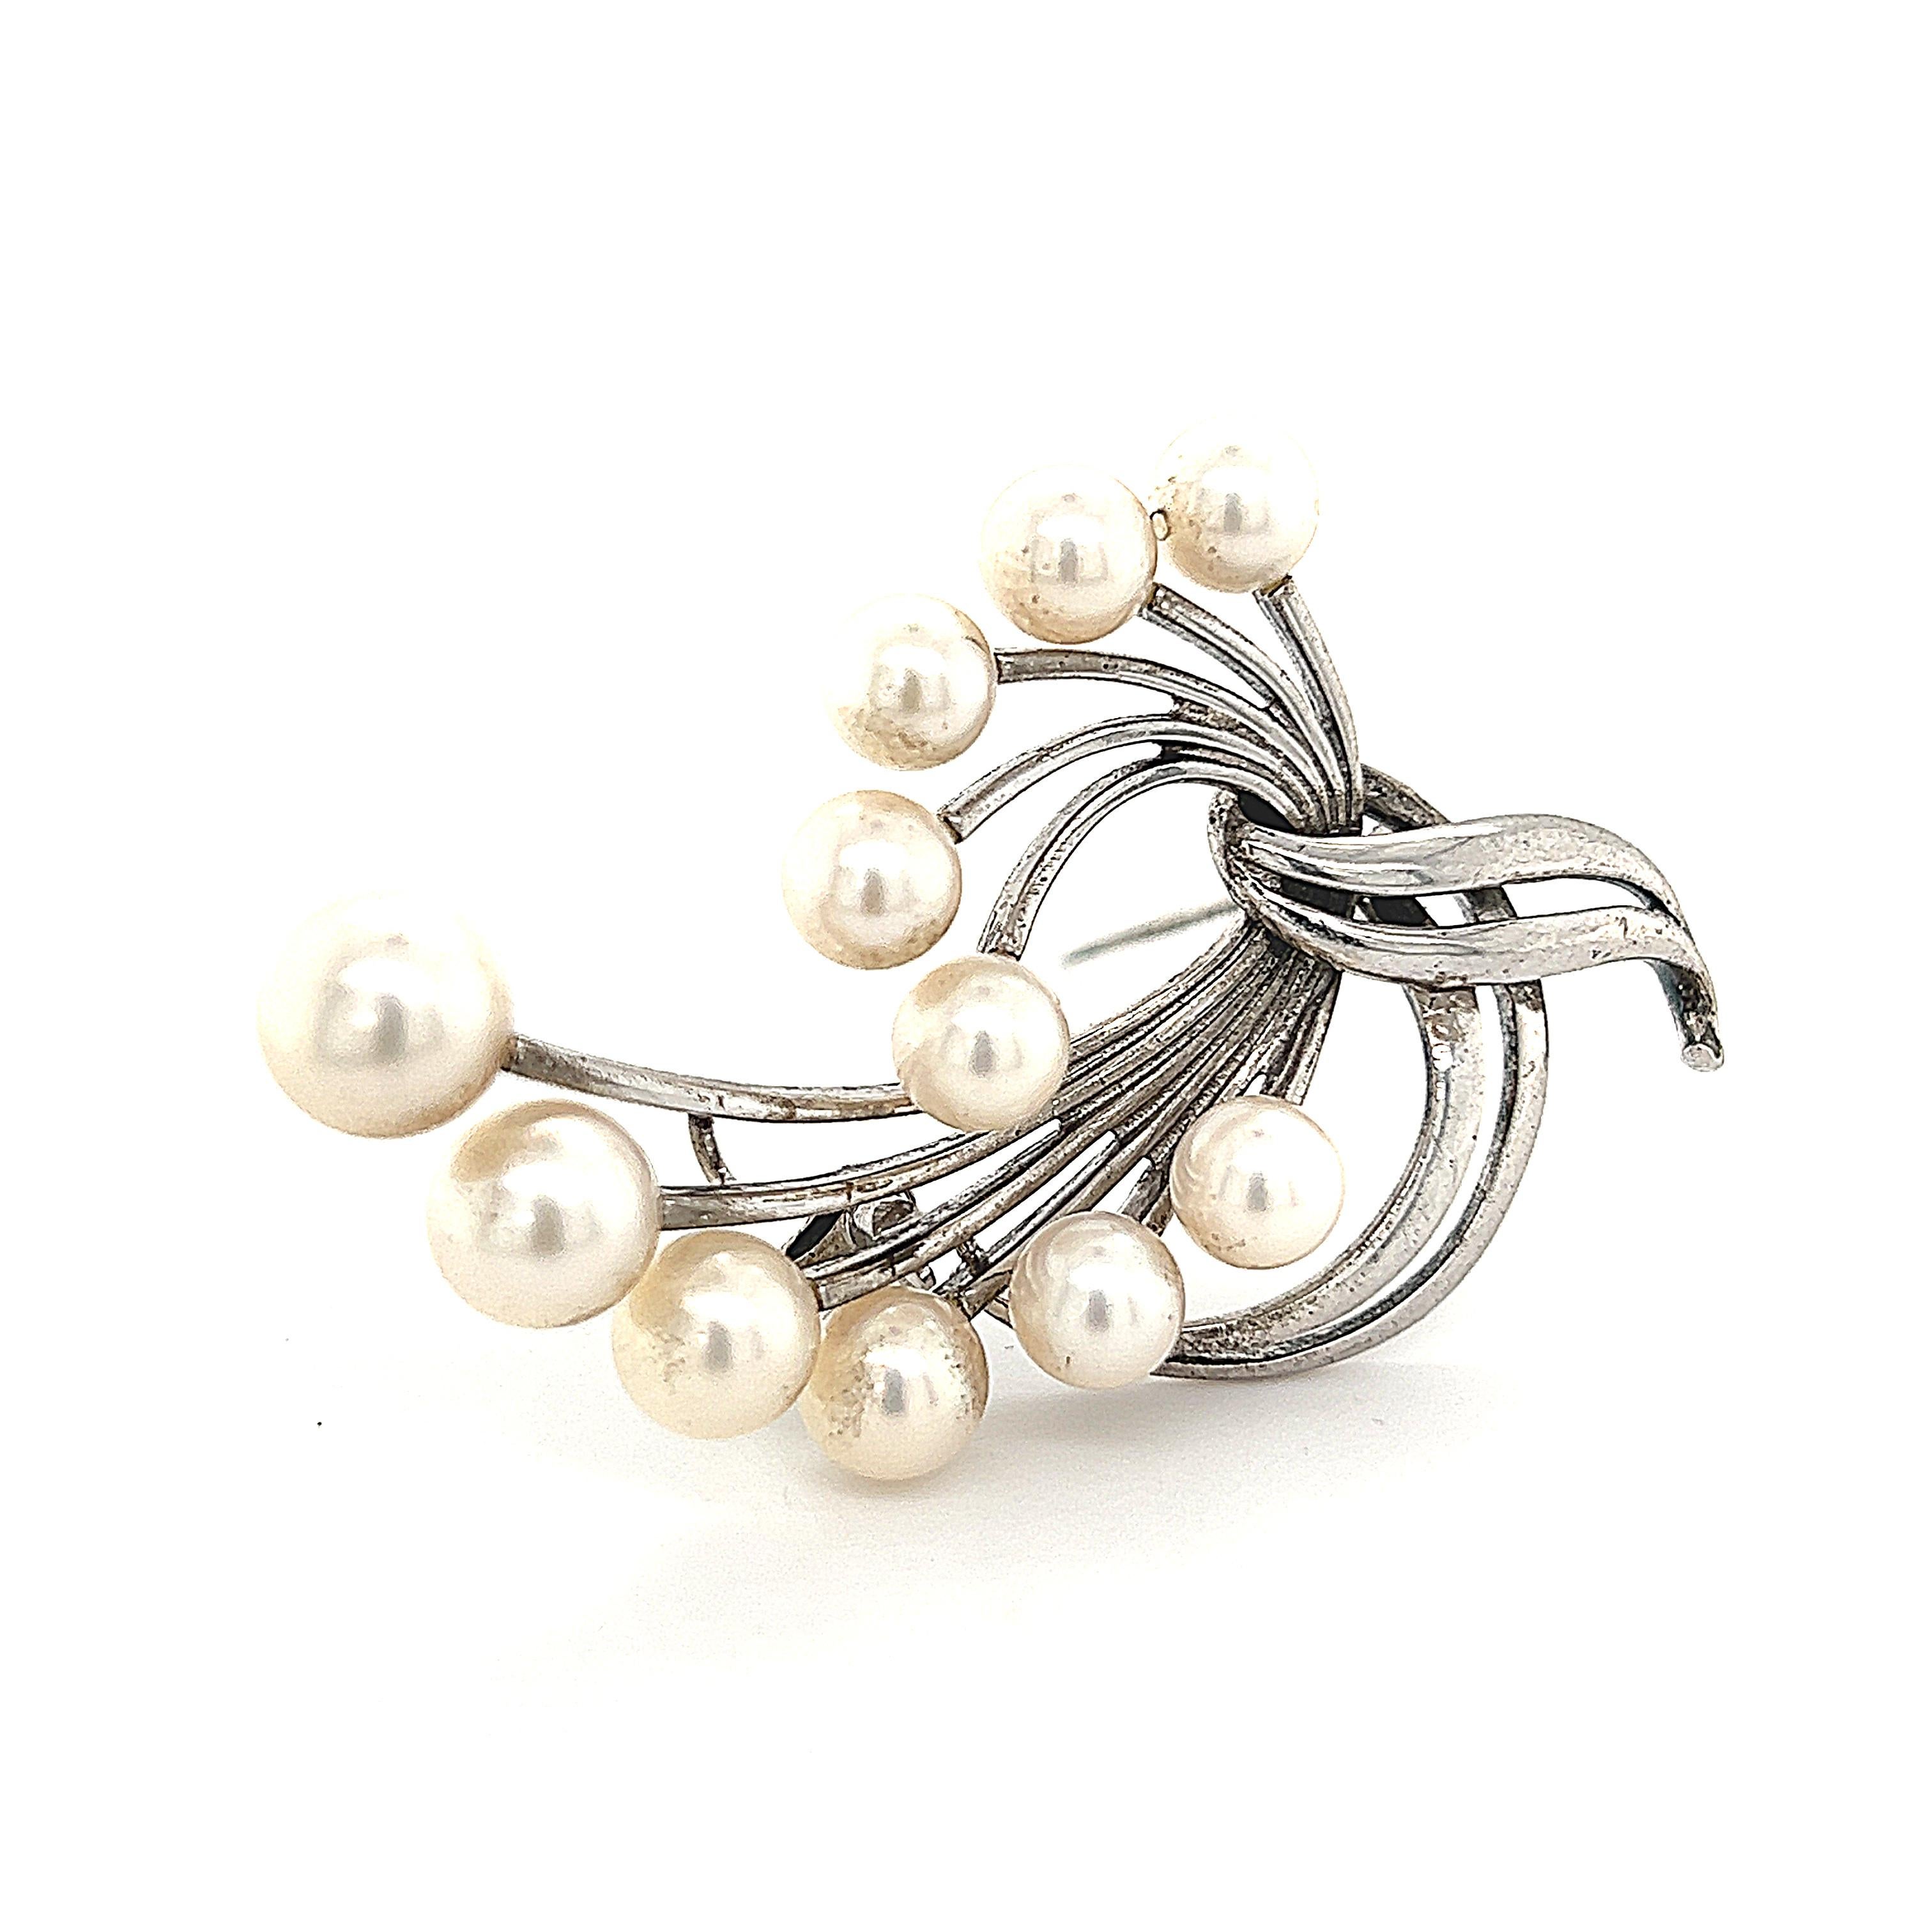 Mikimoto Estate Akoya Pearl Brooch Sterling Silver 6.6 mm 10.3g M243

This elegant Authentic Mikimoto Estate sterling silver brooch has 11 Saltwater Akoya Cultured Pearls and has a weight of 10.3 Grams.

TRUSTED SELLER SINCE 2002

PLEASE SEE OUR